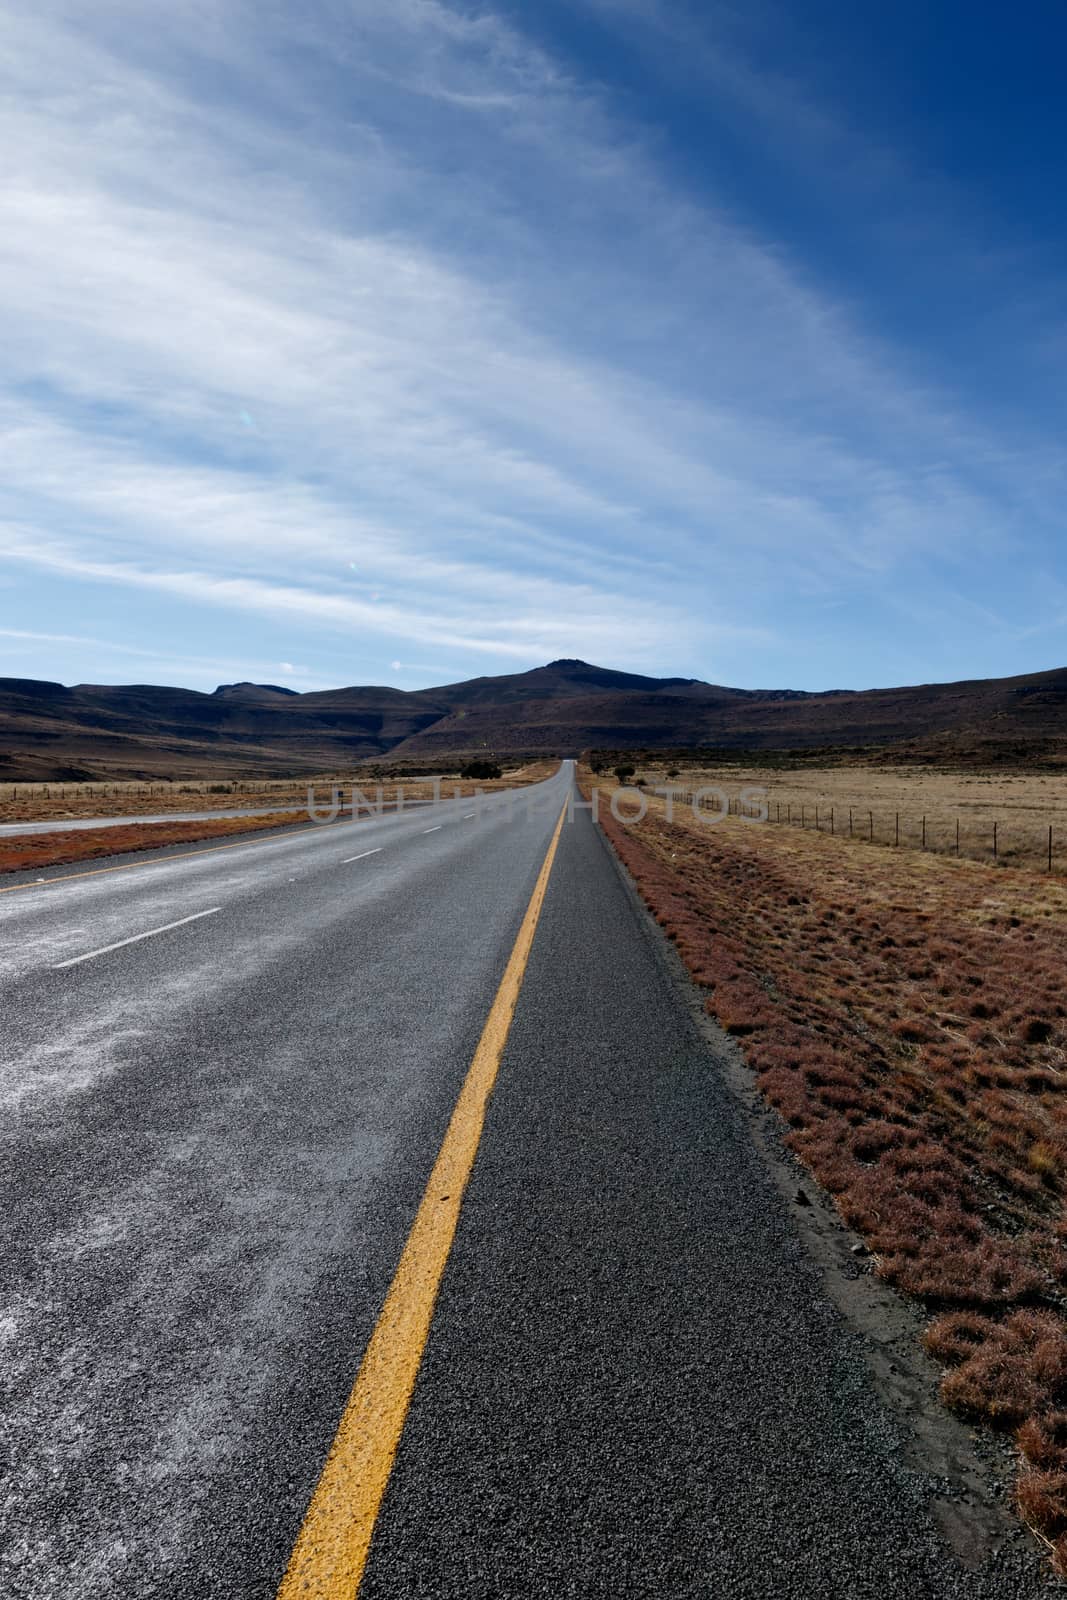 The long road leading to the mountains with blue skies in Graaff-Reinet.